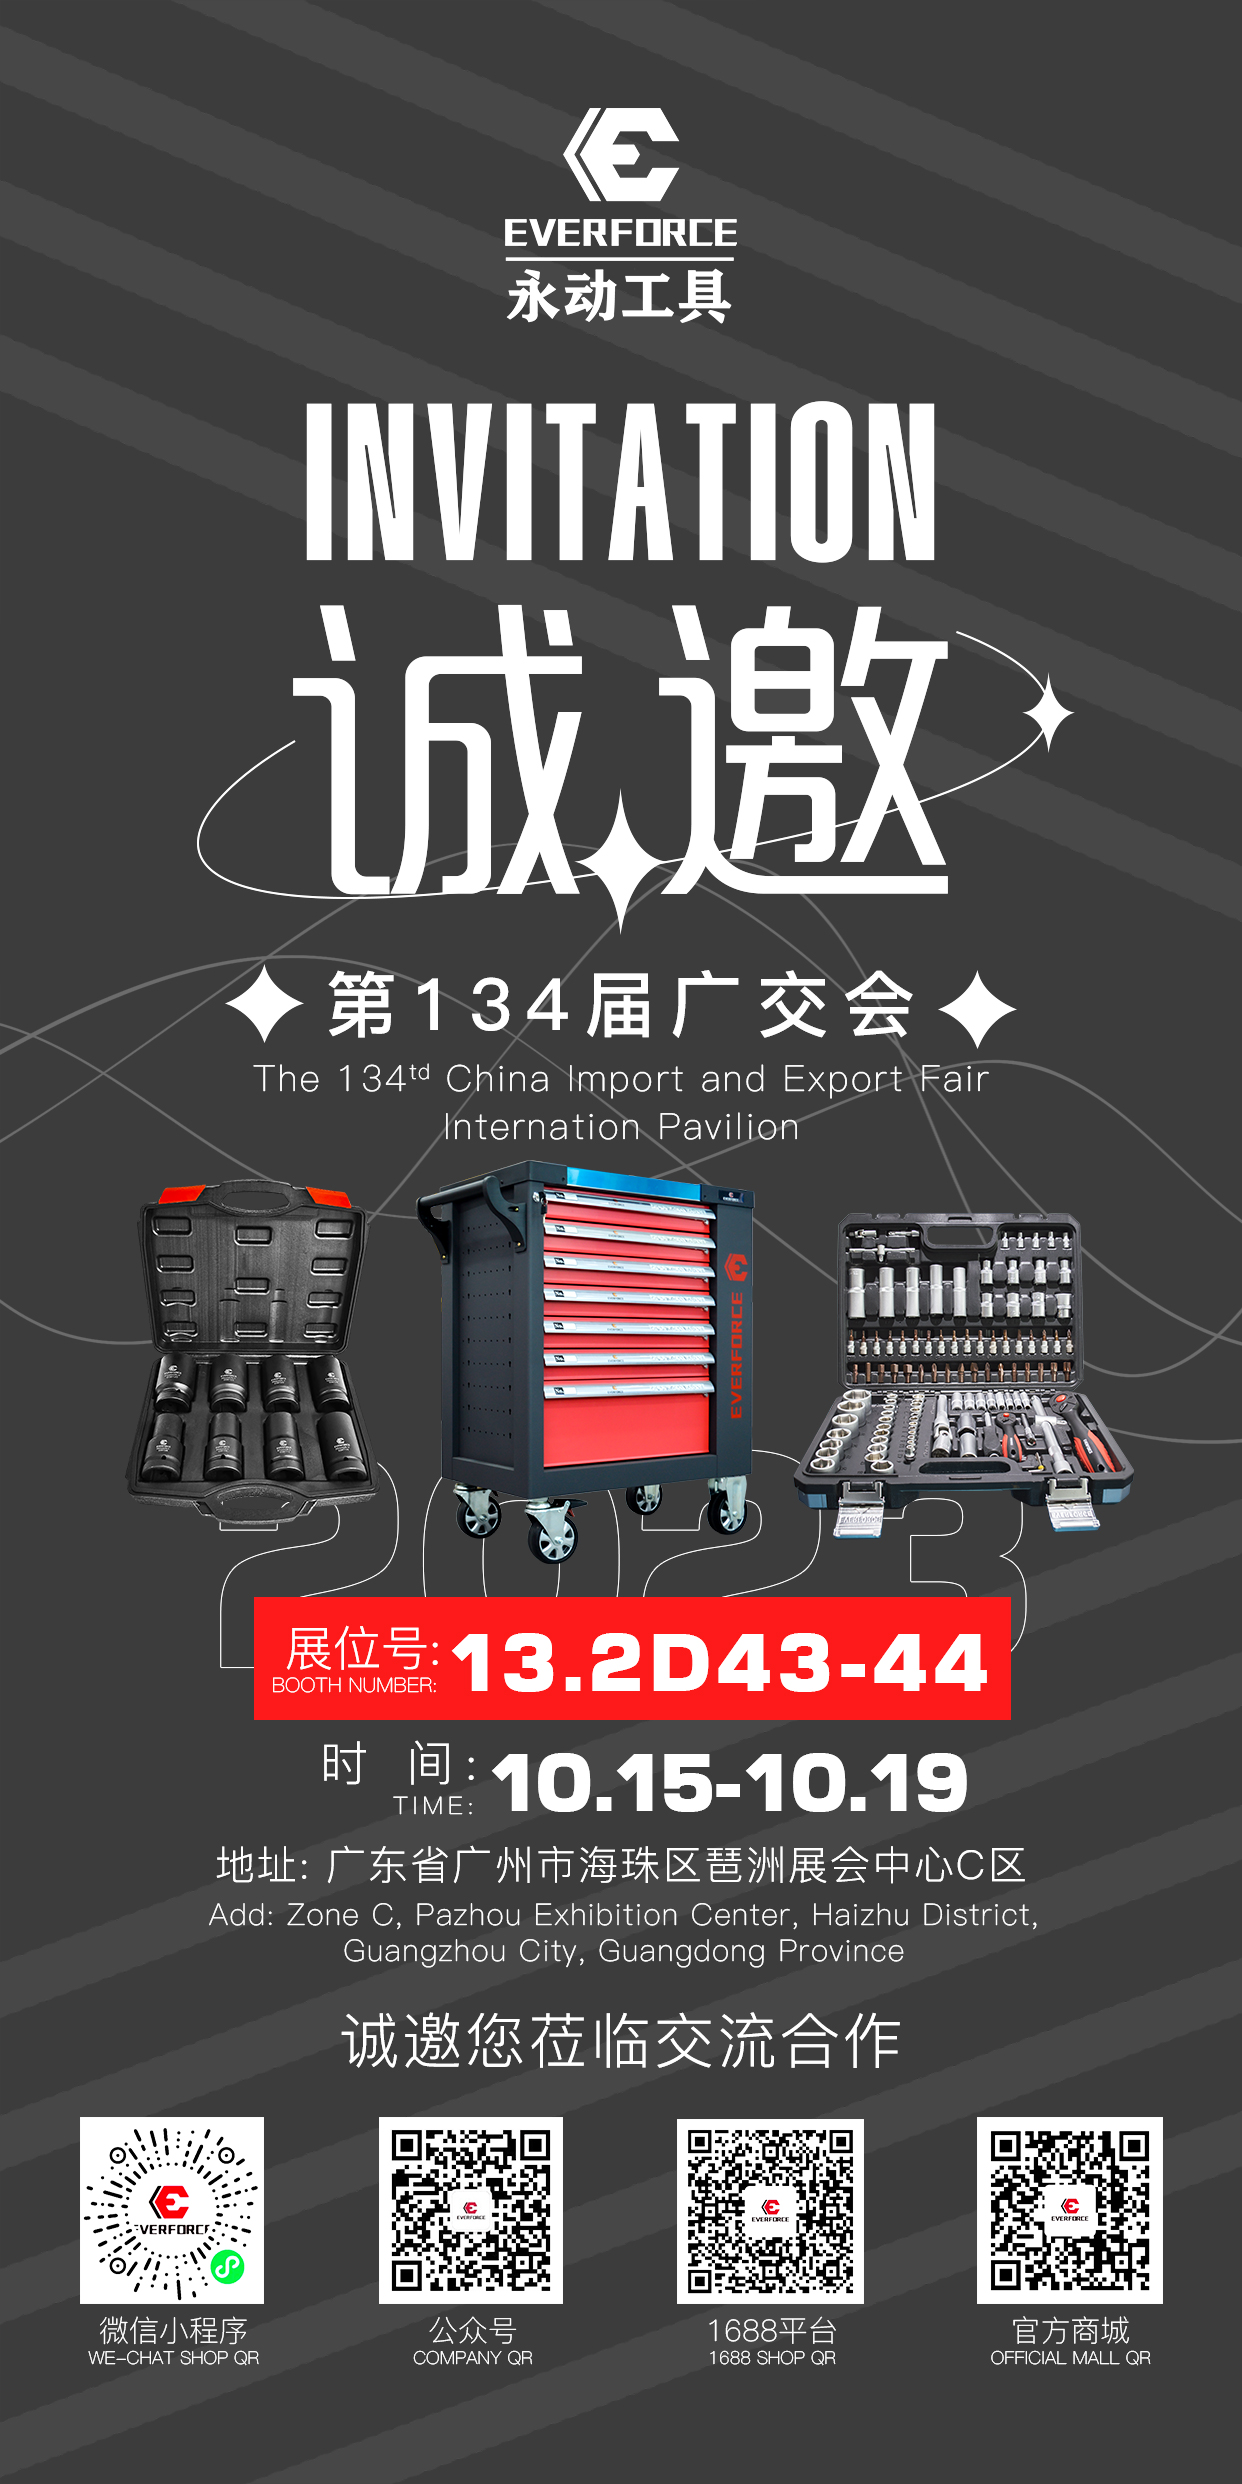 Fujian Yongdong tools participated in the 134th Canton Fair